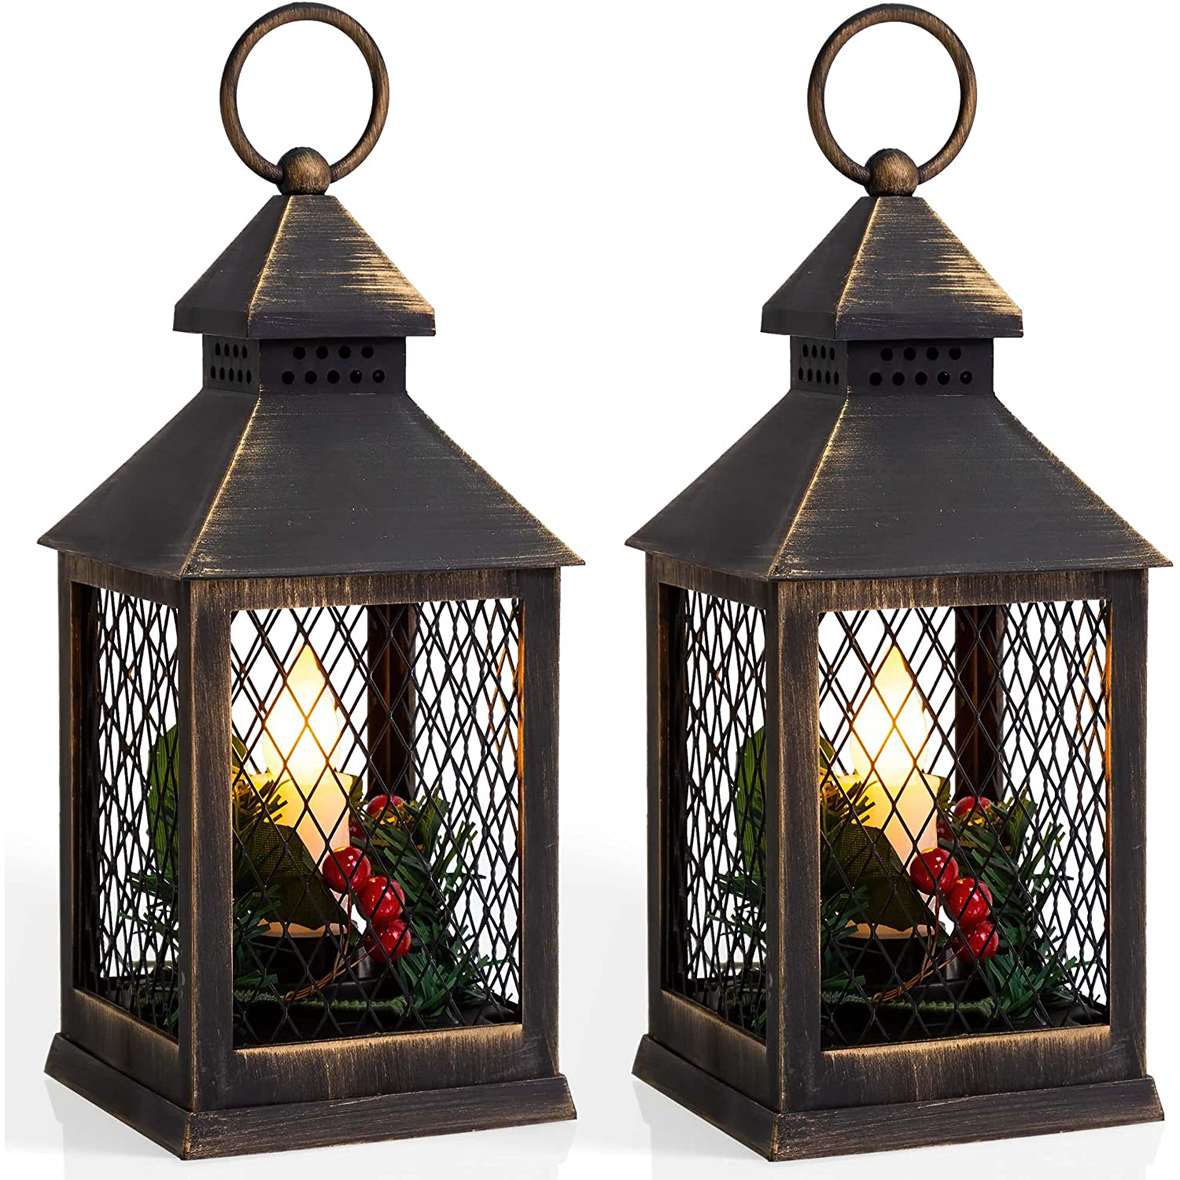 Yongmao Decorative Lantern LED Candle with Timer Vintage Christmas Black Look Distressed Pine Holly Berry Barbed Wire Hanging Lantern for Indoor Outdoor Home Christmas Decor